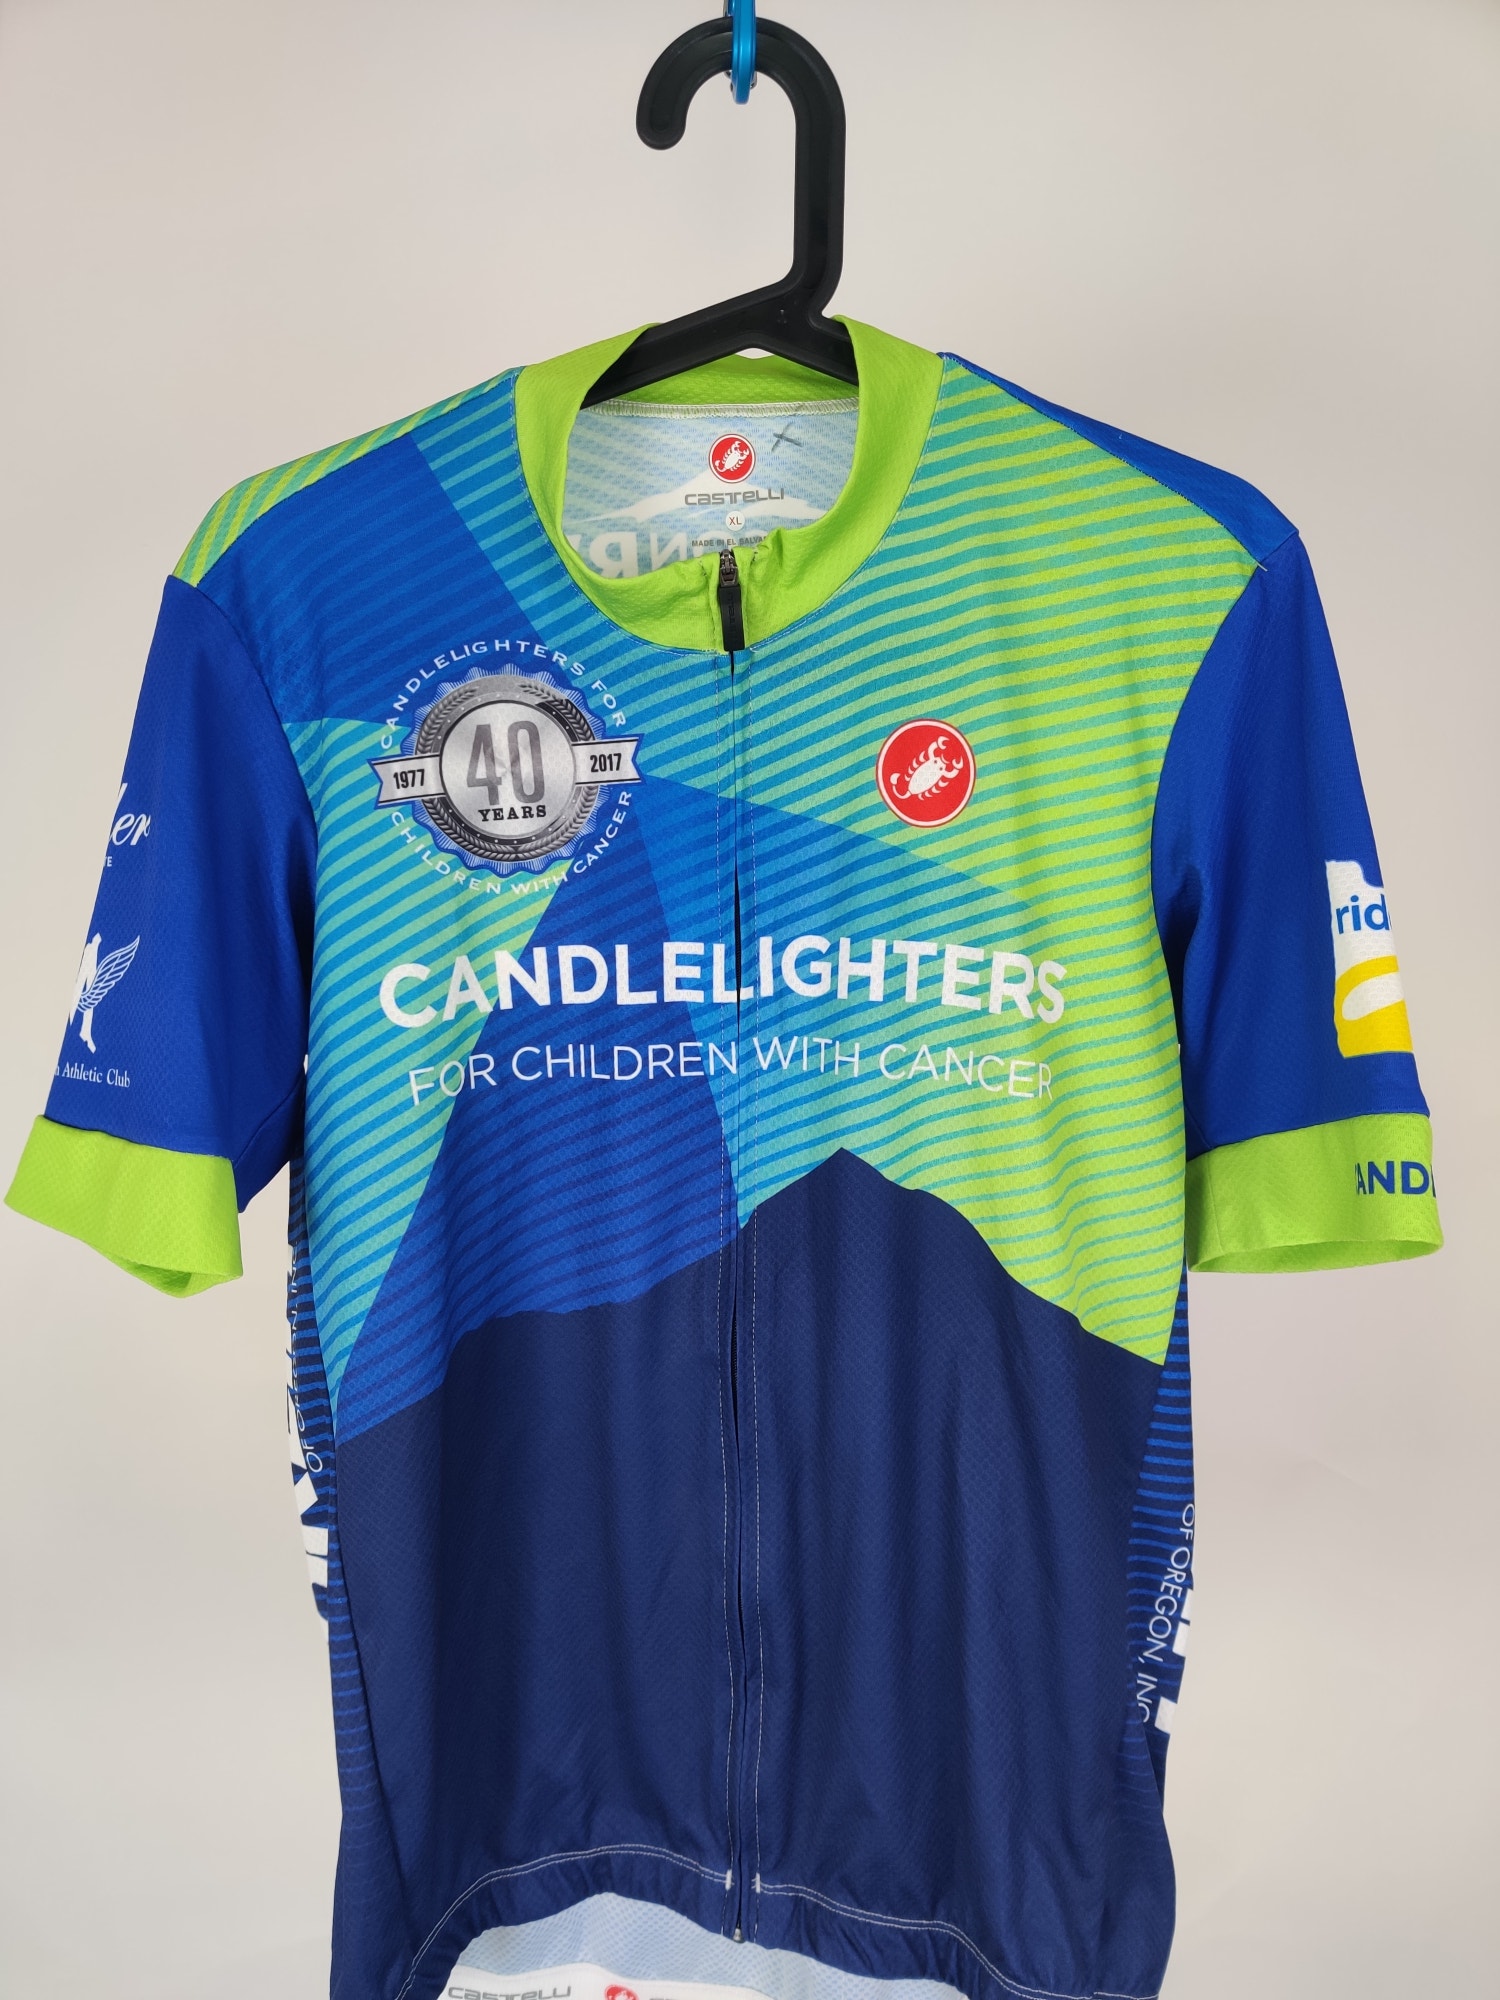 (V) Castelli Candlelighters Men cycling jersey lightweight multicolor sz XL  - Picture 5 of 11